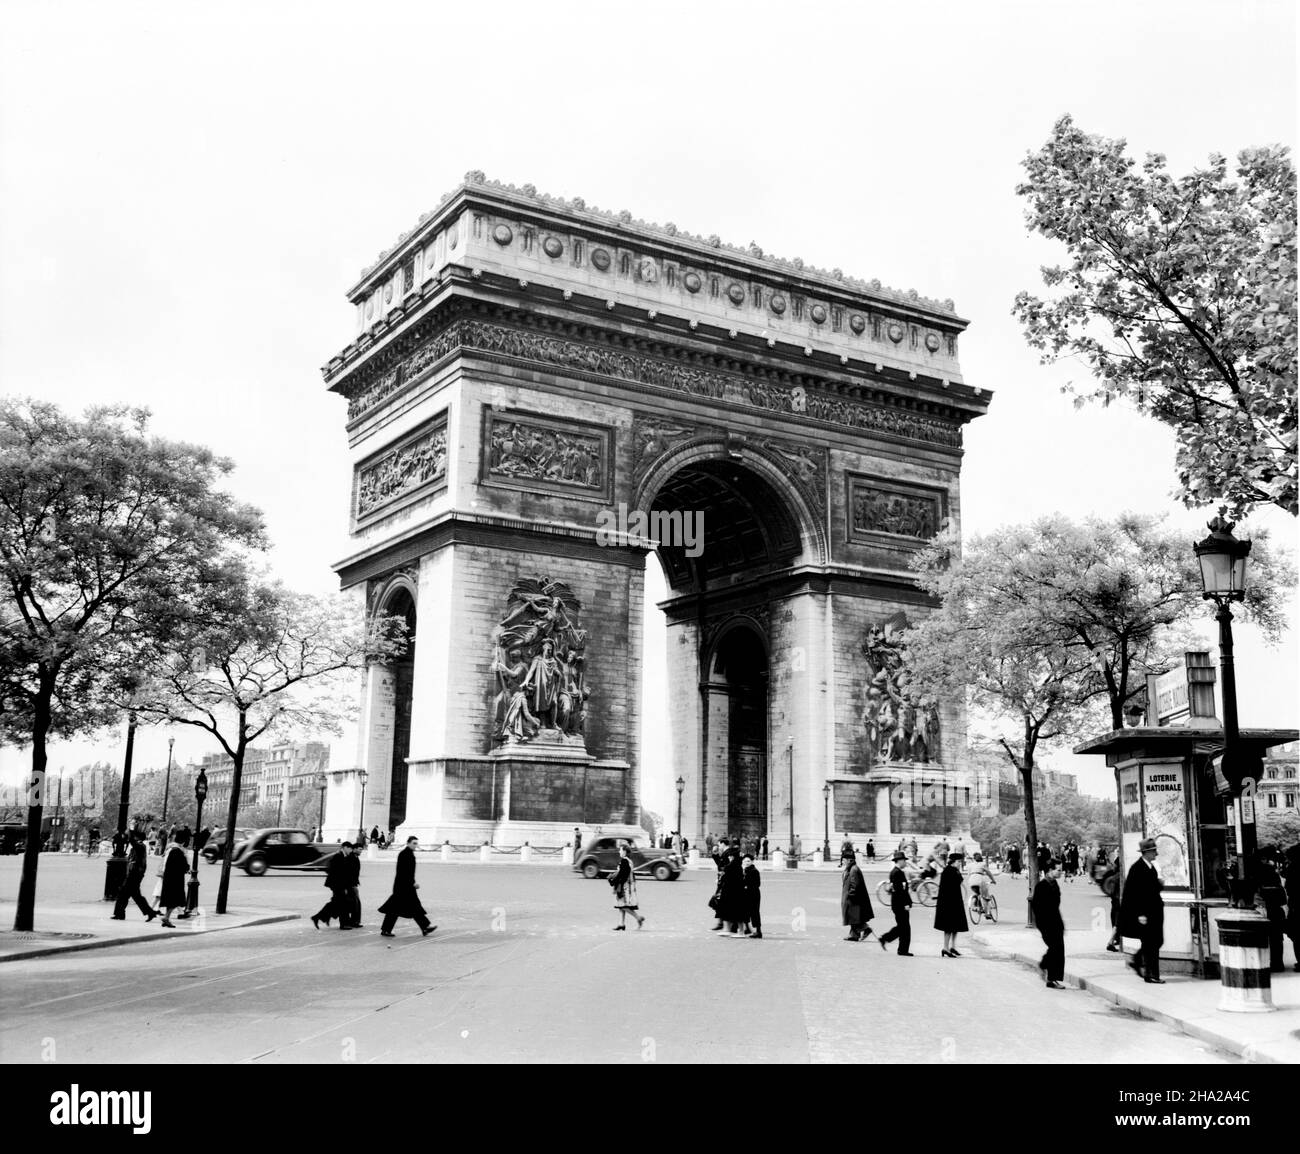 Paris Arc de triomphe 1945 with pedestrians, cylists, and few autos The view of the arch and the circular Place de l'Étoile is taken from Avenue Marceau near the end of World War II in Europe.  The roadway contains only several motor vehicles and several bicyclists.  In the photo are numerous pedestrians in the foreground and visitors beneath the Arc. There are two kiosks promoting the Loterie Nationale. Vintage streetlights are in view. The photo is framed by trees with Spring foliage. Stock Photo